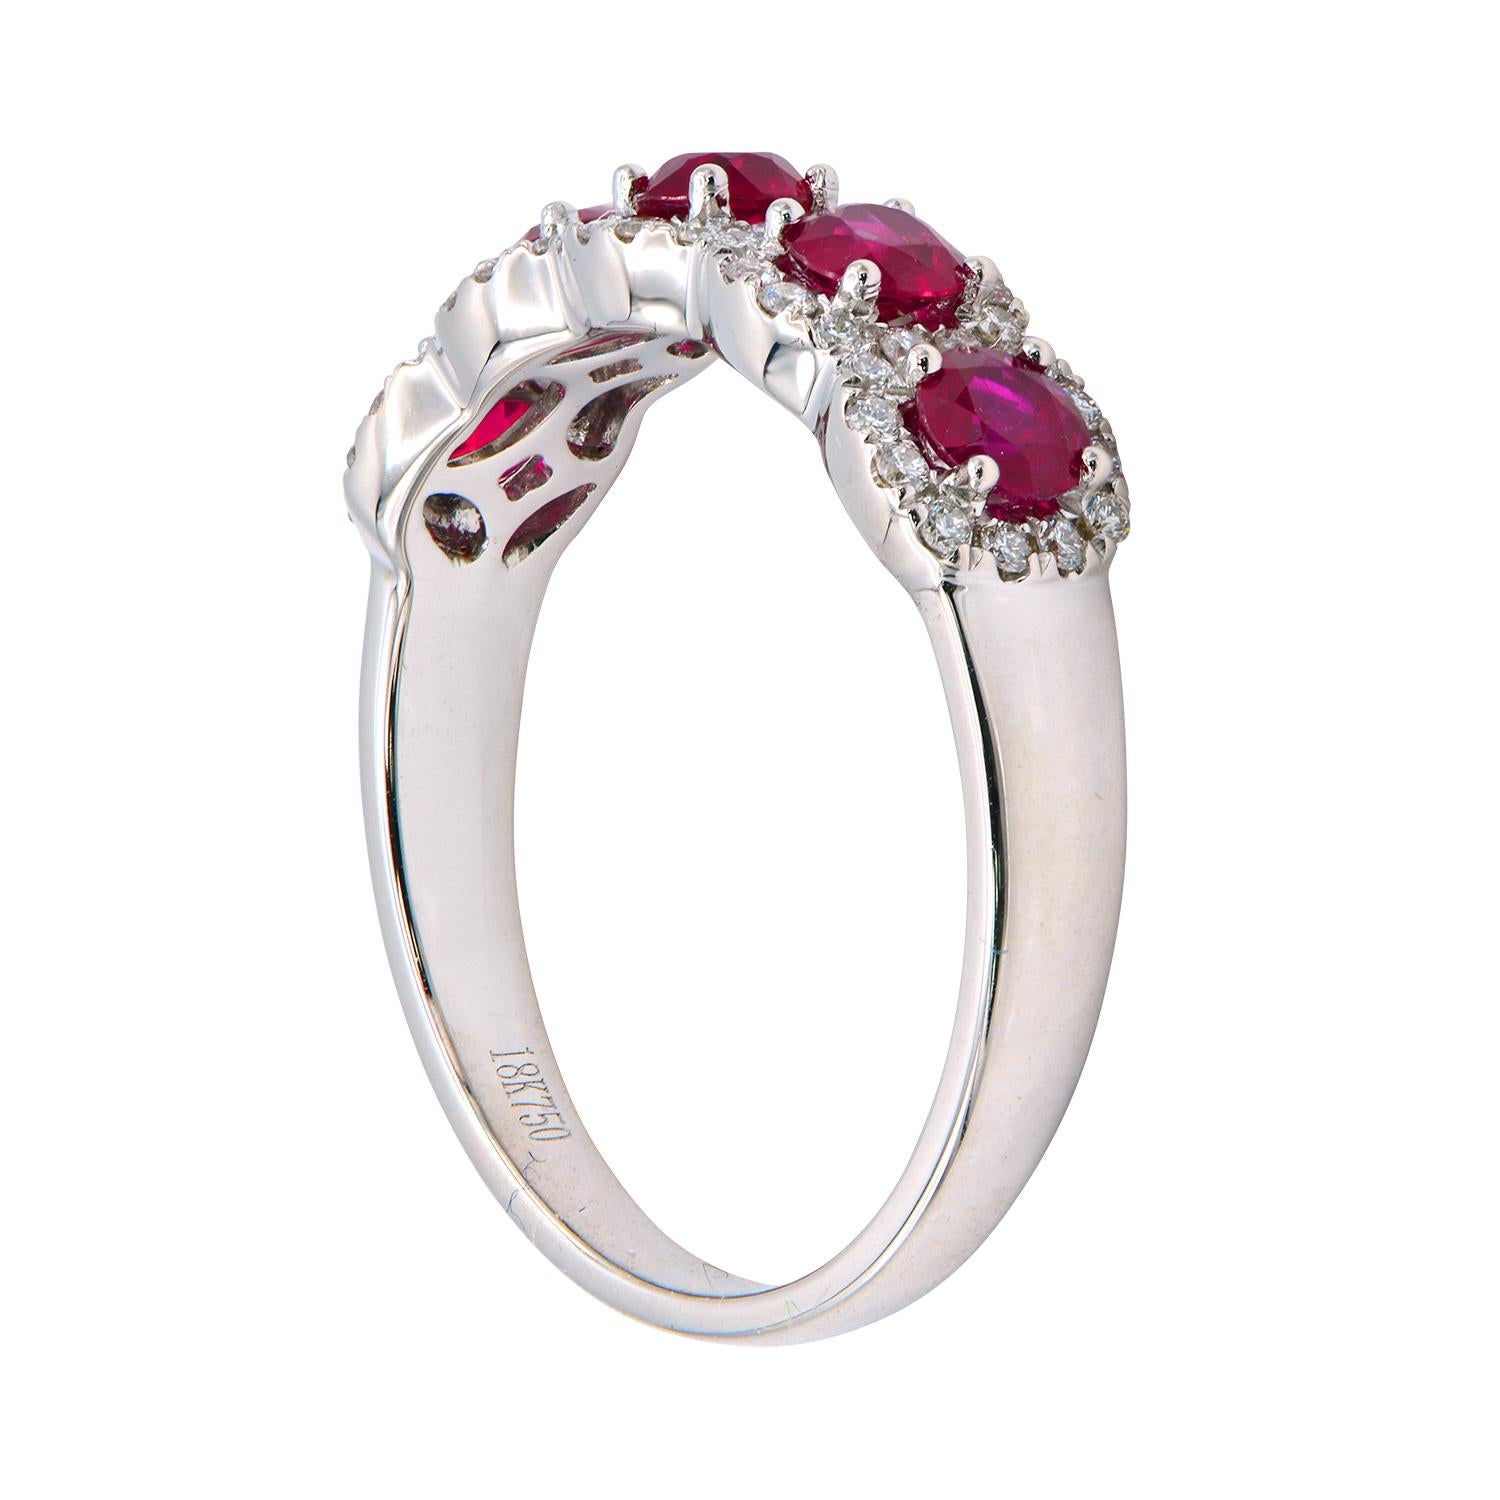 With this exquisite diamond band, style and glamour are in the spotlight. This 18-karat diamond and ruby band is made from 3.0 grams of gold. The top is adorned with one row of VS2, G color diamonds, made out of 52 diamonds totaling 0.19 carats, and